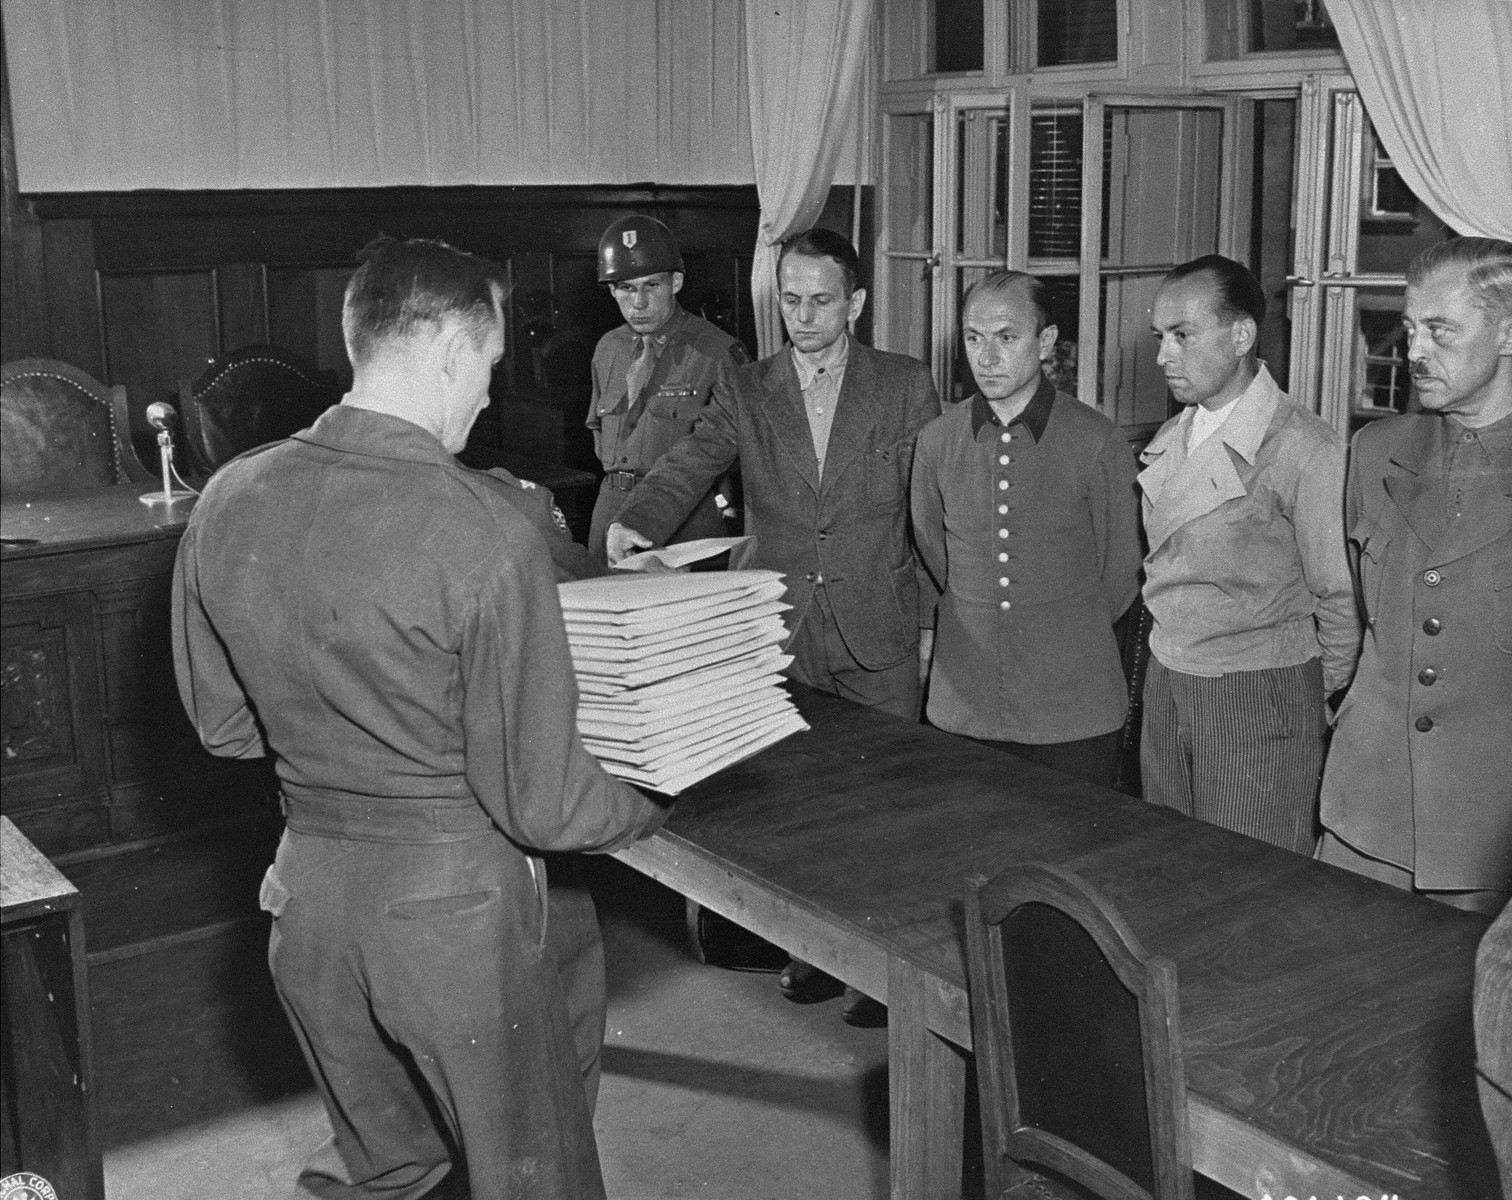 Defendant Otto Ohlendorf (left) receives his indictment from Col. C.W. Mays, Marshal of the Military Tribunal, before the Einsatzgruppen Trial.  The other defendants (left to right) are, Heinz Jost, Erich Naumann, and Erwin Schulz.